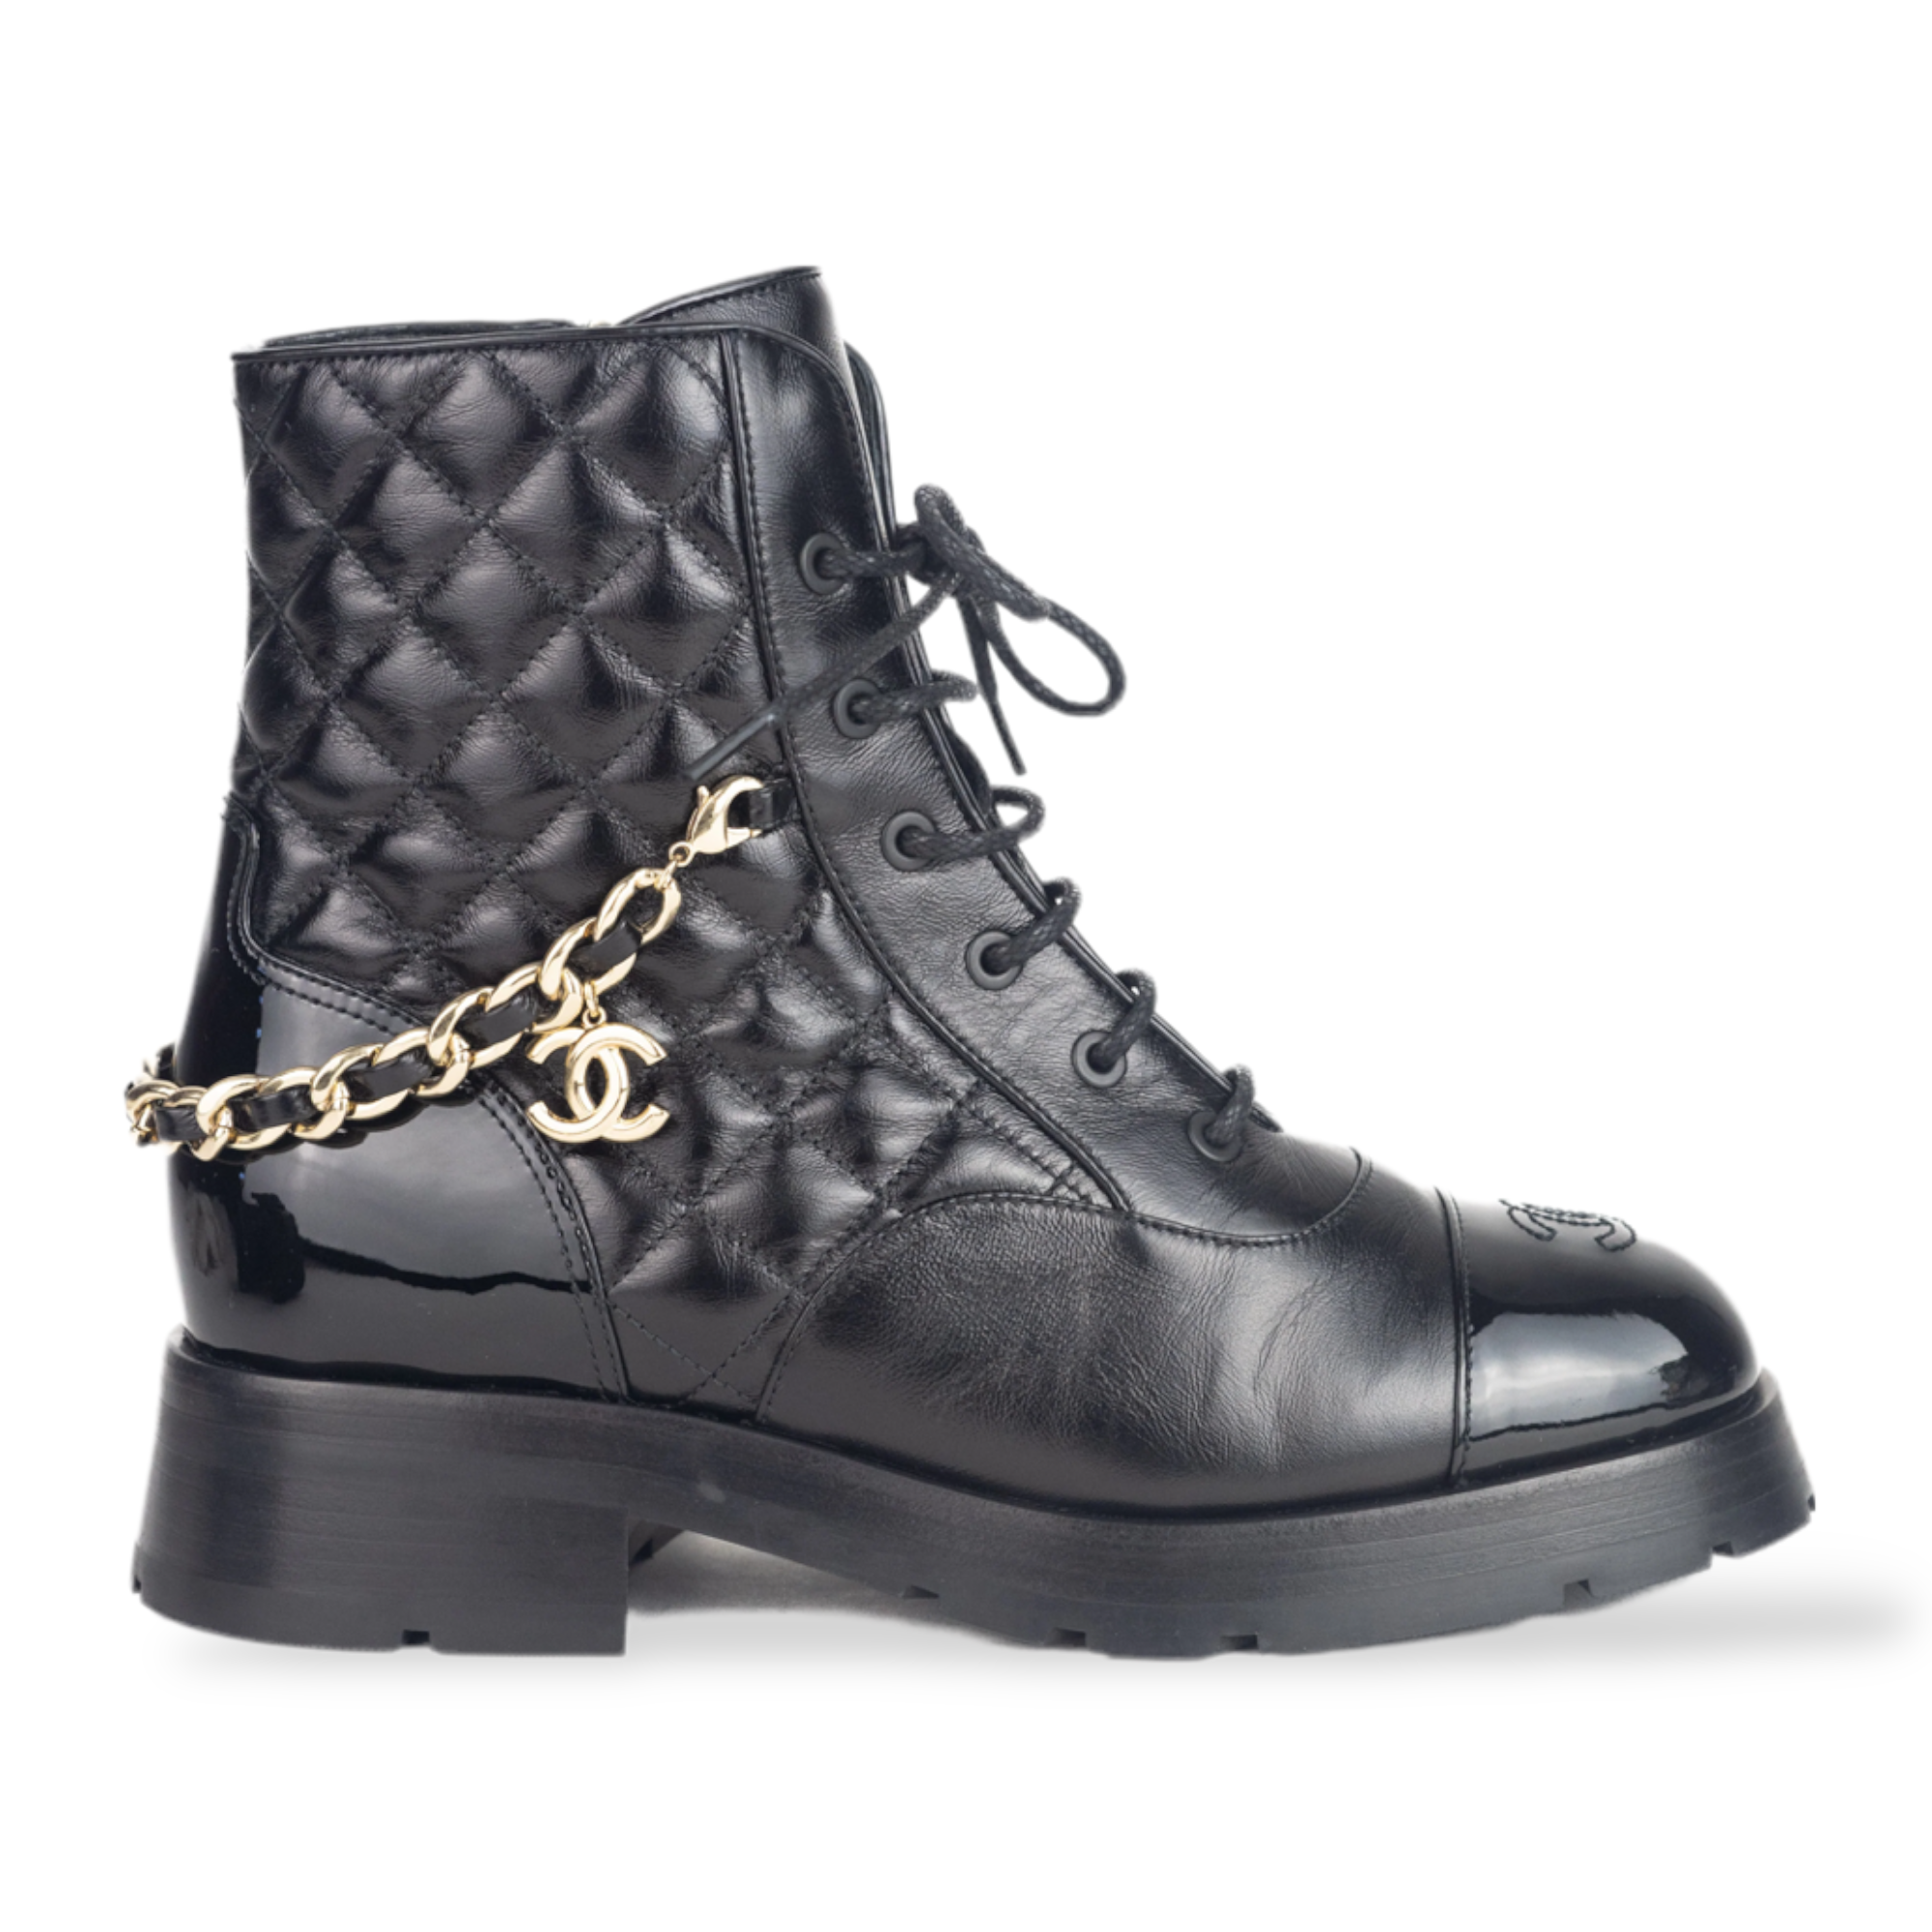 CHANEL, Shoes, Chanel Lace Up Boots Size 365